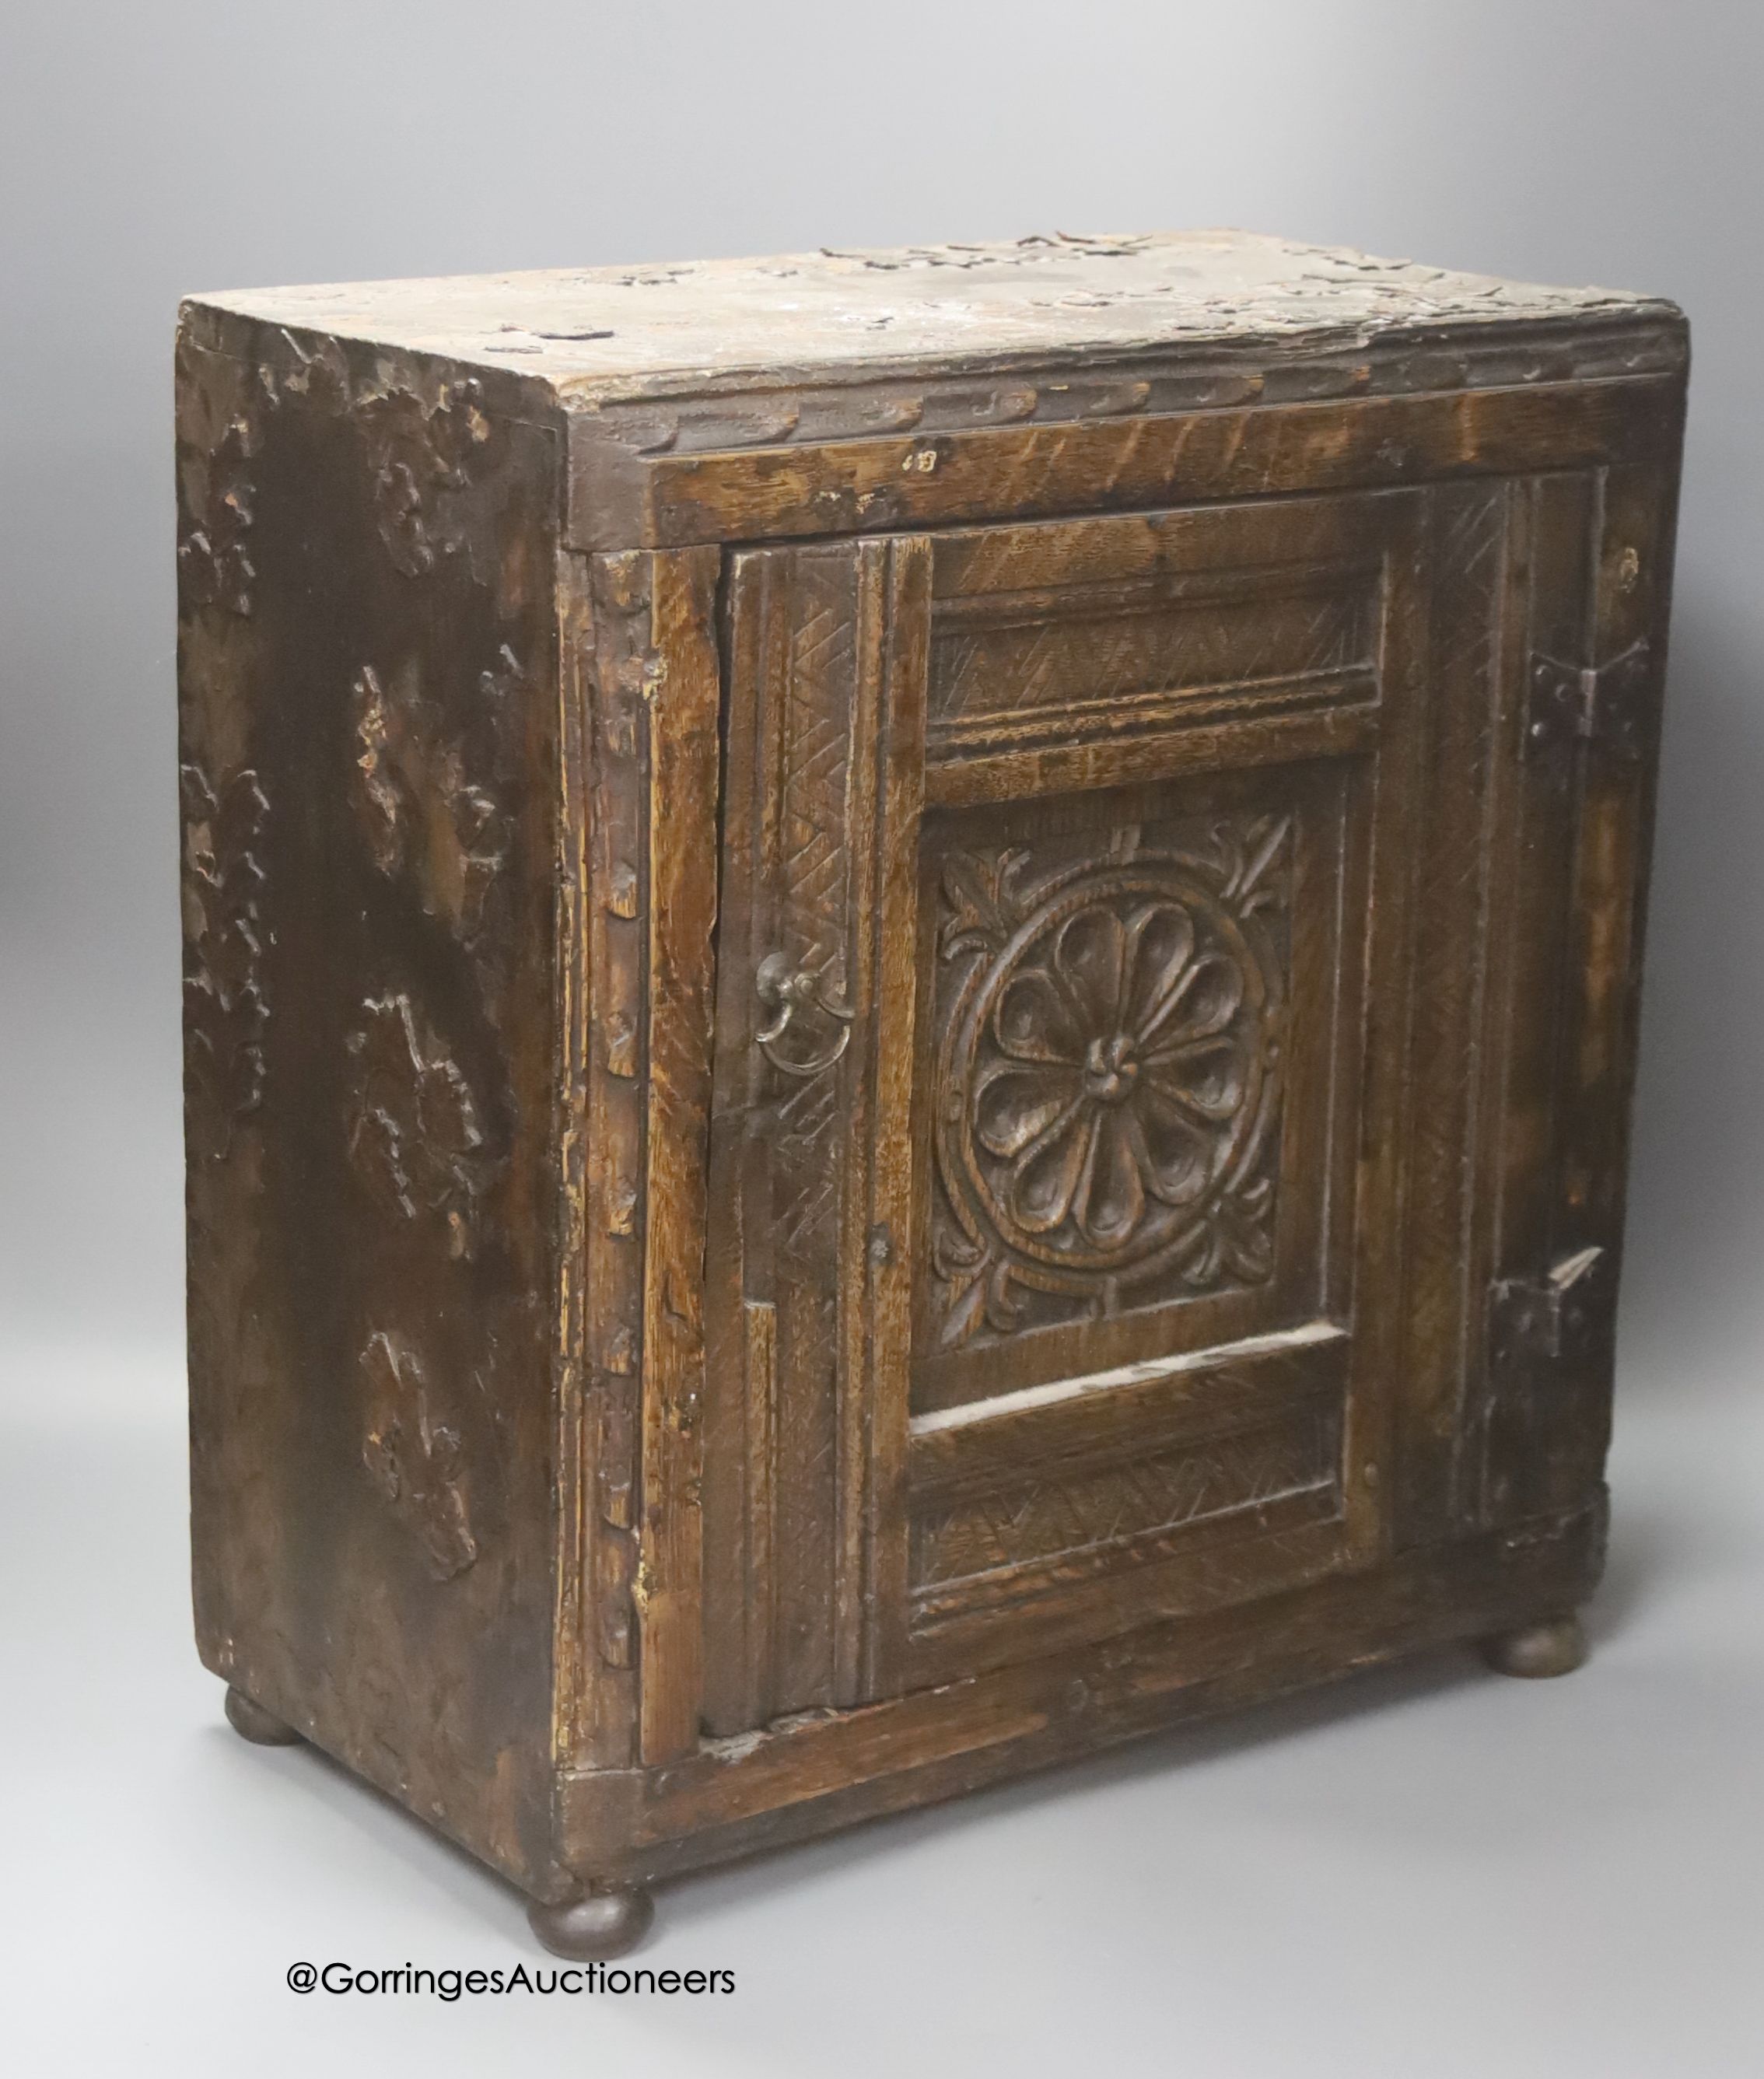 A small 17th century carved oak wall cabinet, enclosed by single panelled door with iron butterfly hinges, width 37cm